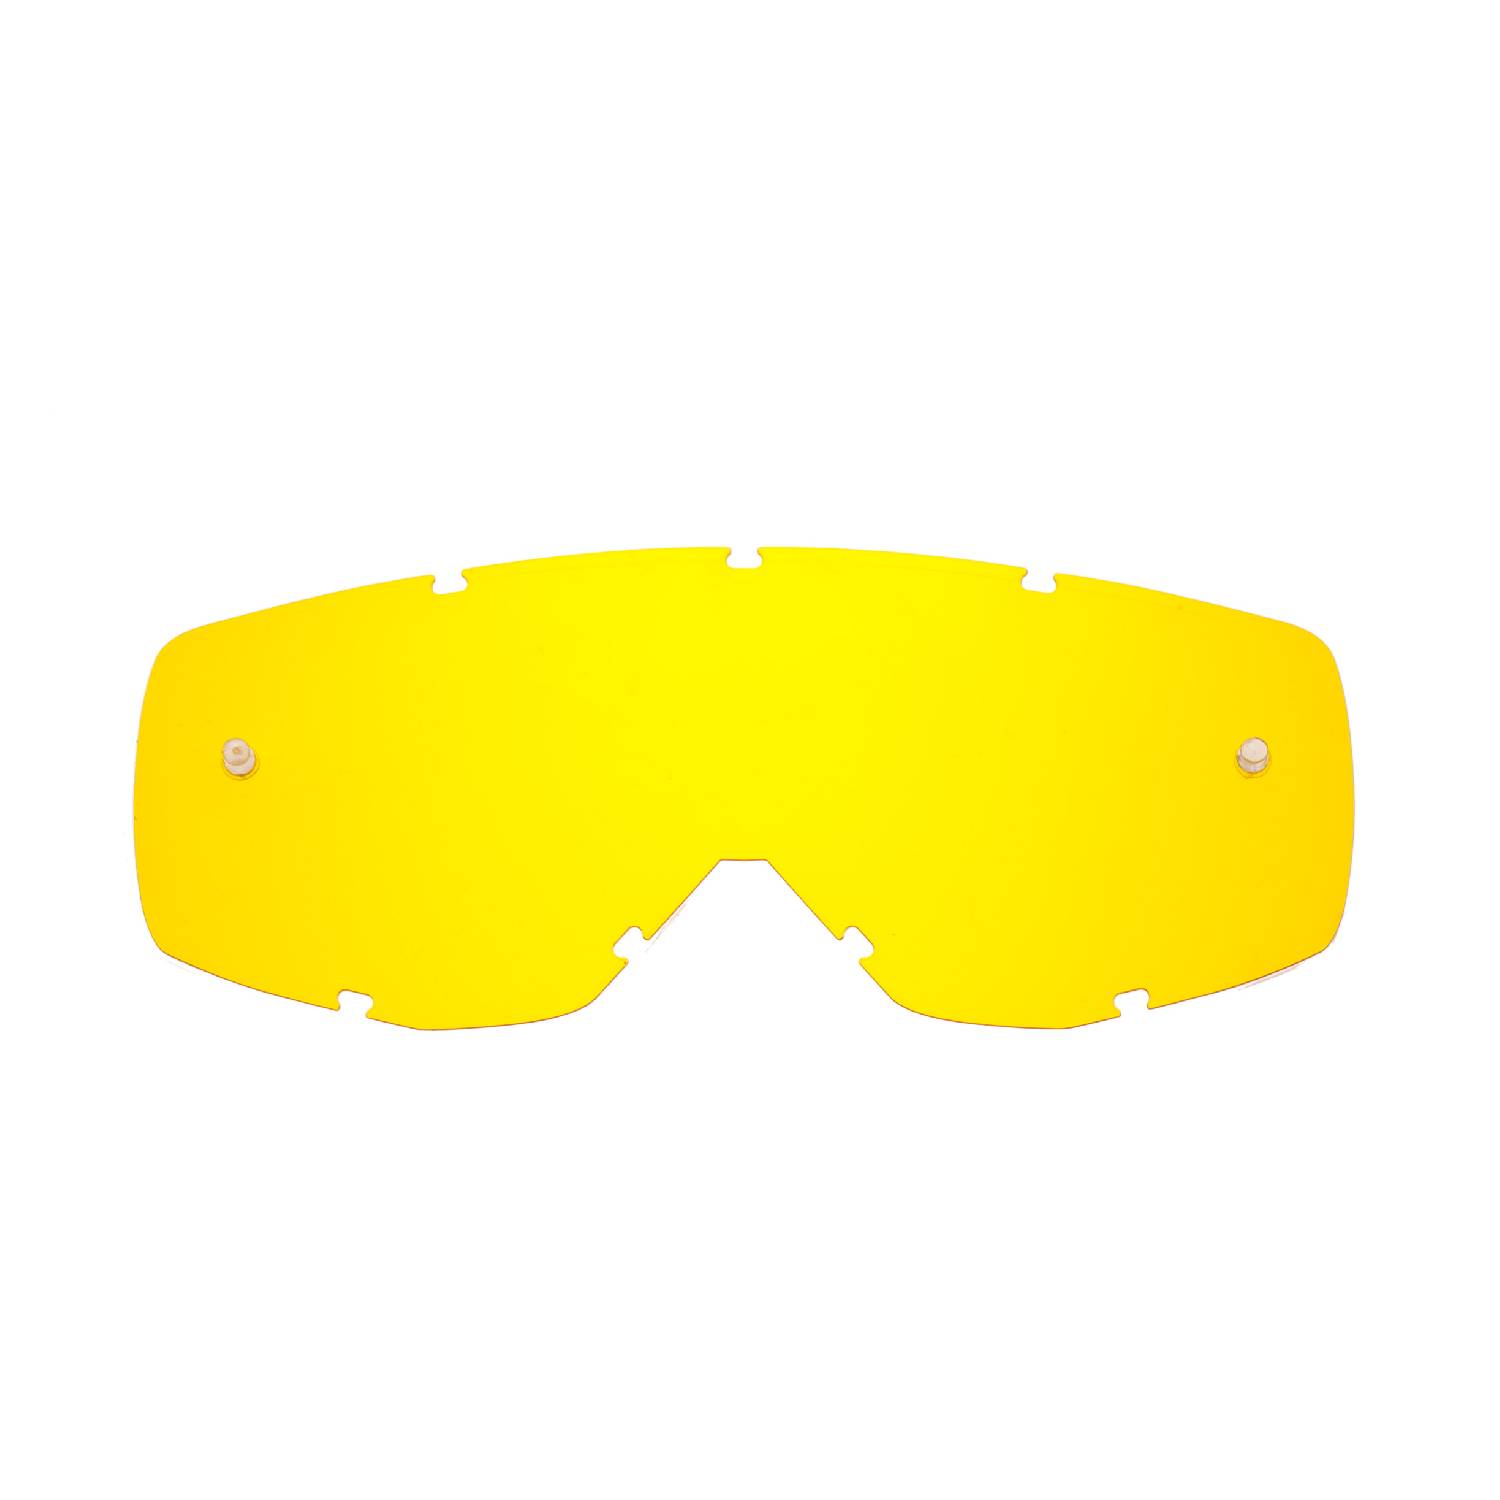 yellow replacement lenses for goggles compatible for Scott Hustle/ Primal / Tyrant / Split goggle